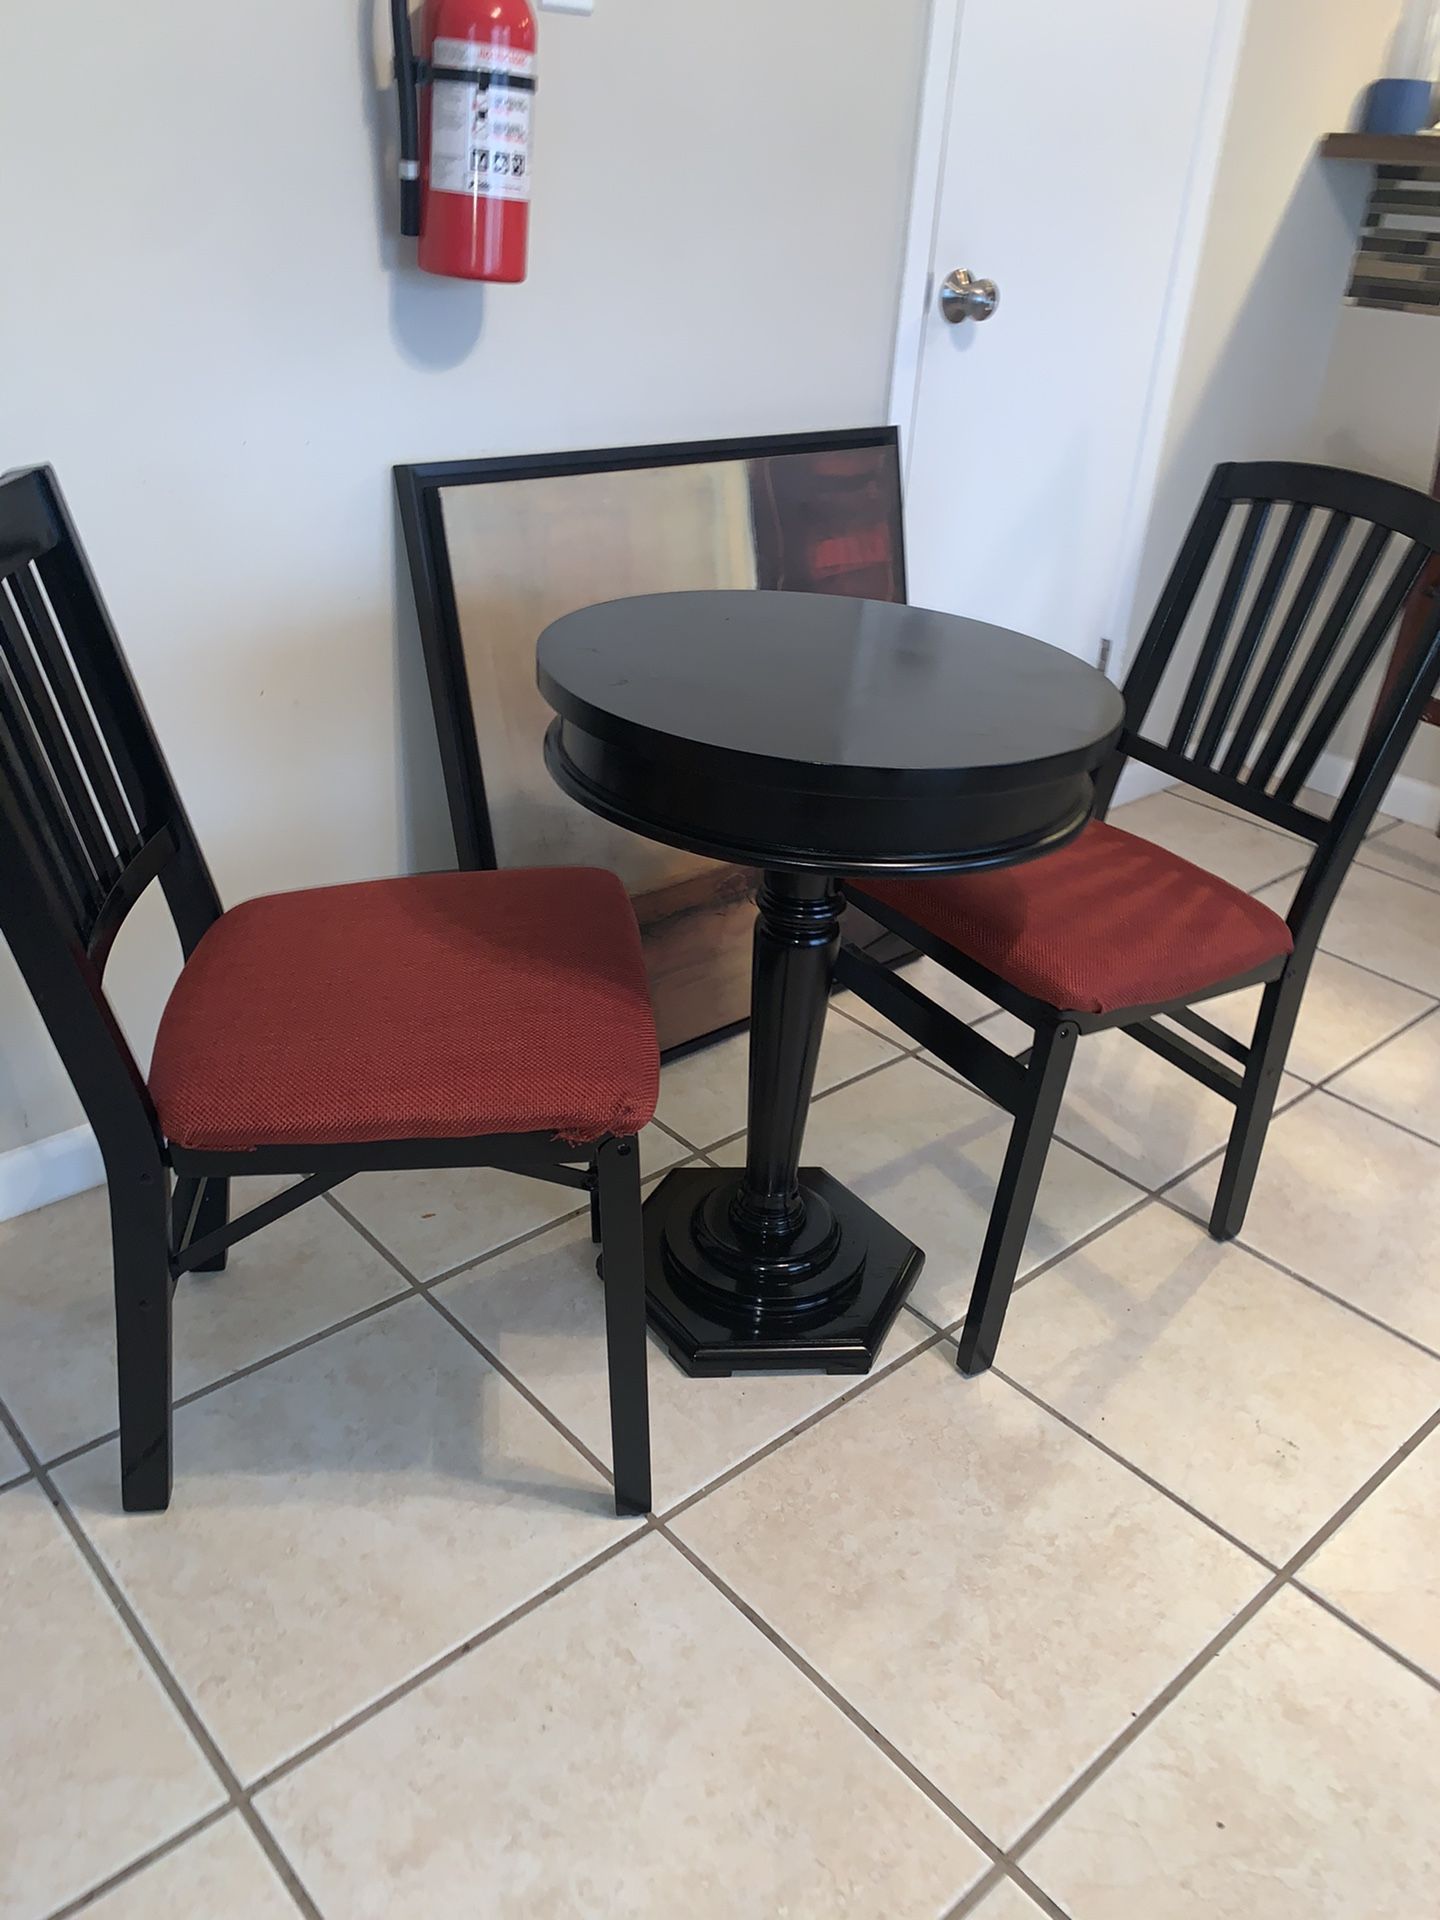 Small bistro table and chairs